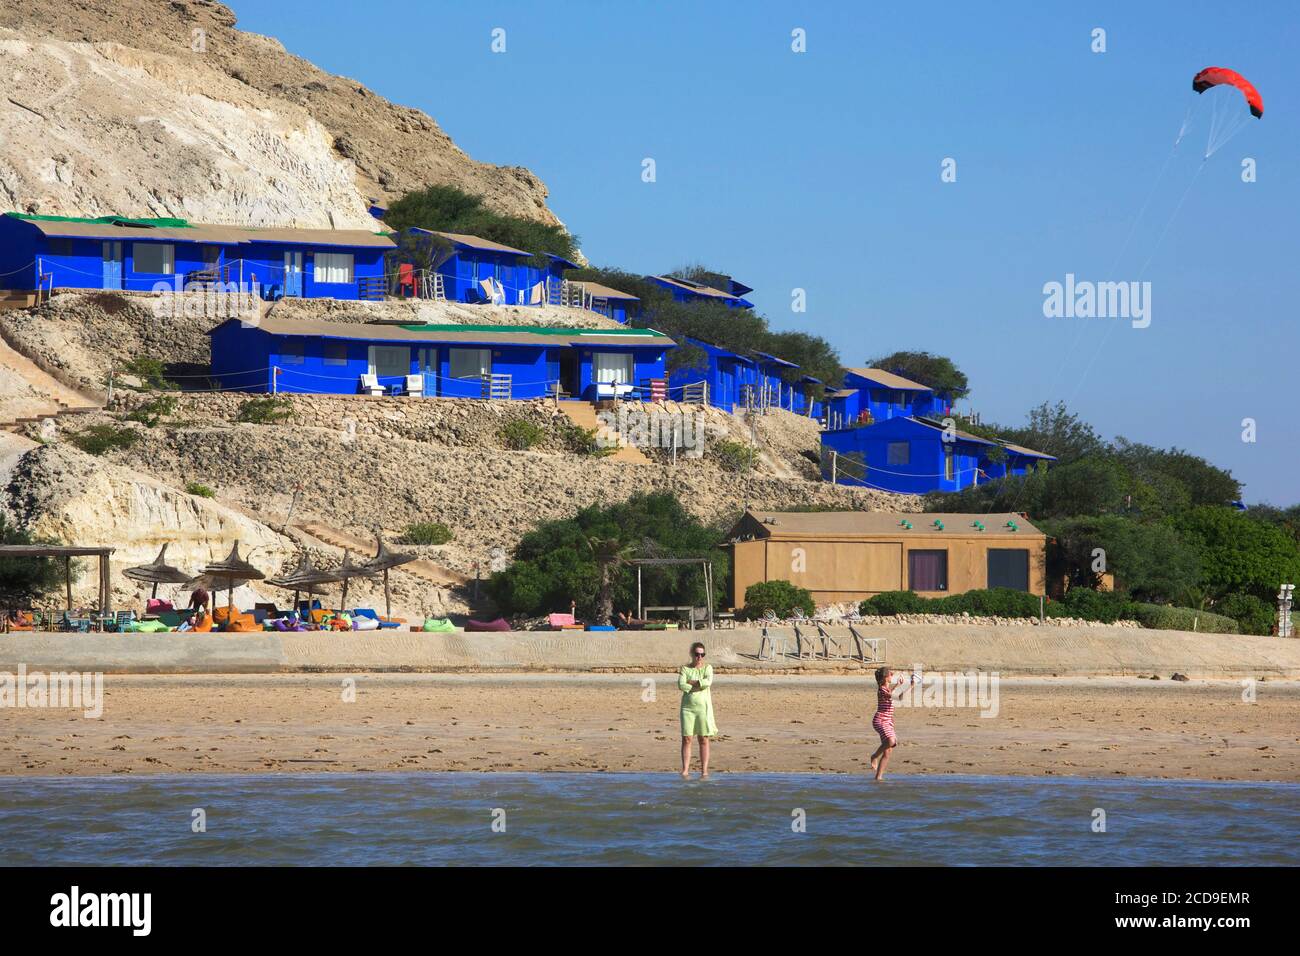 Morocco, Western Sahara, Dakhla, Dakhla kite camp Attitude posed in front of the lagoon with its Majorelle blue bungalows on the hillside Stock Photo